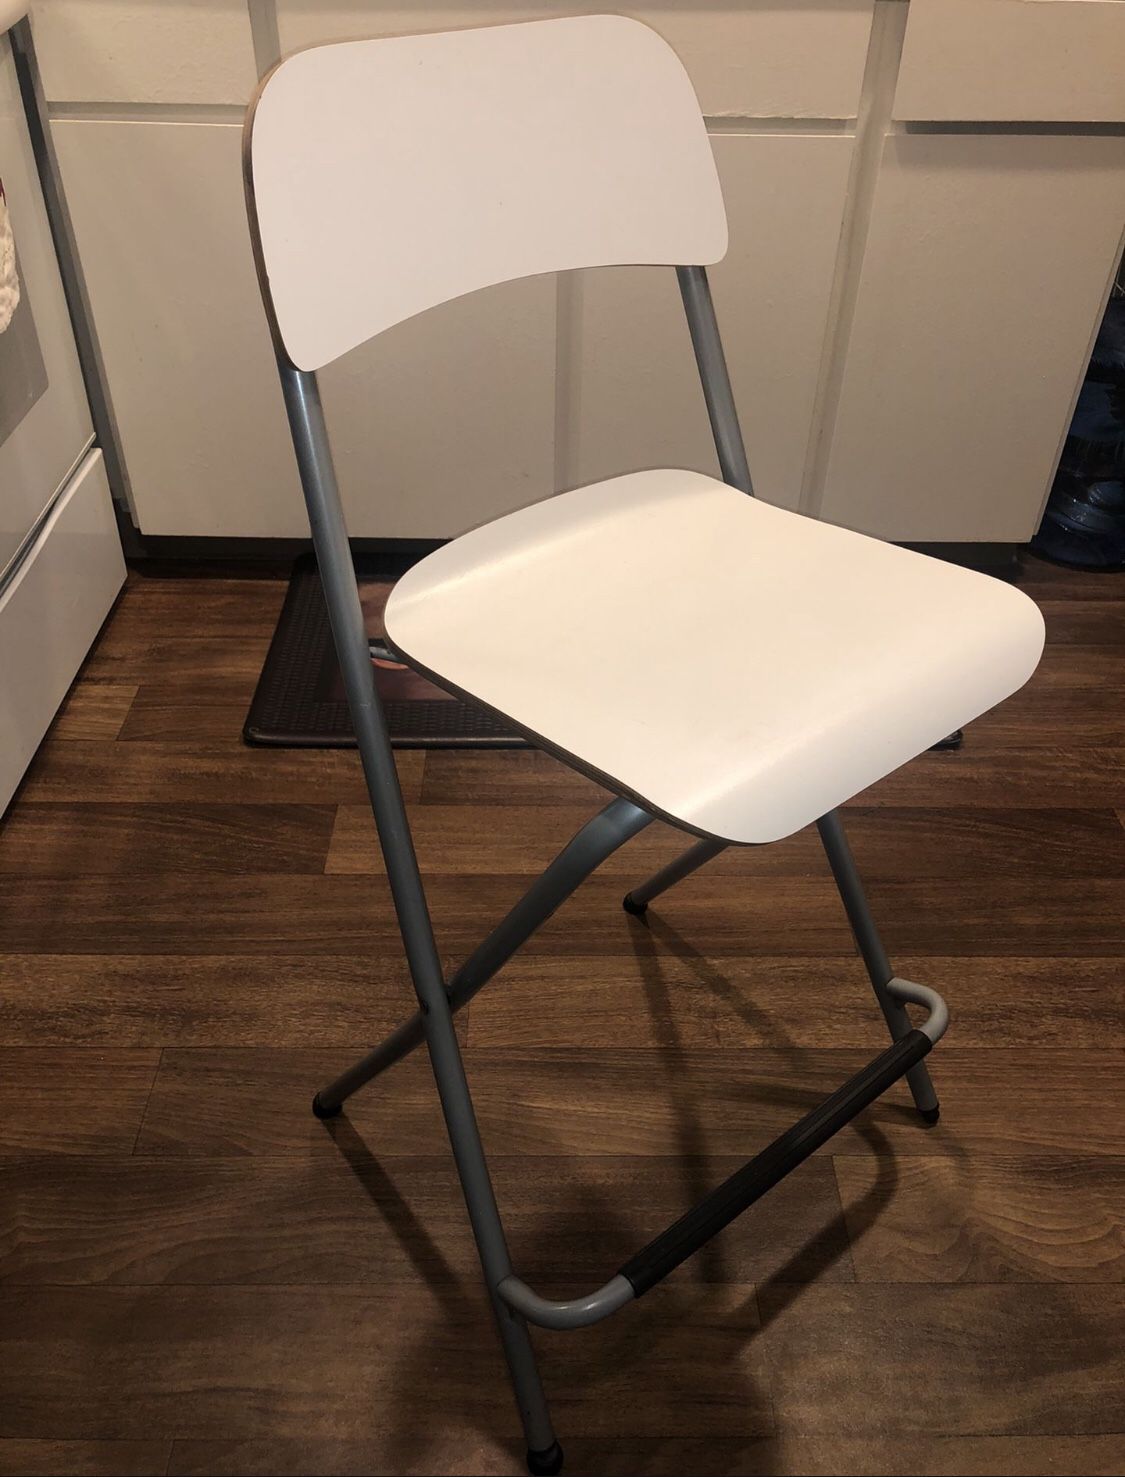 Foldable Directors White Chair 